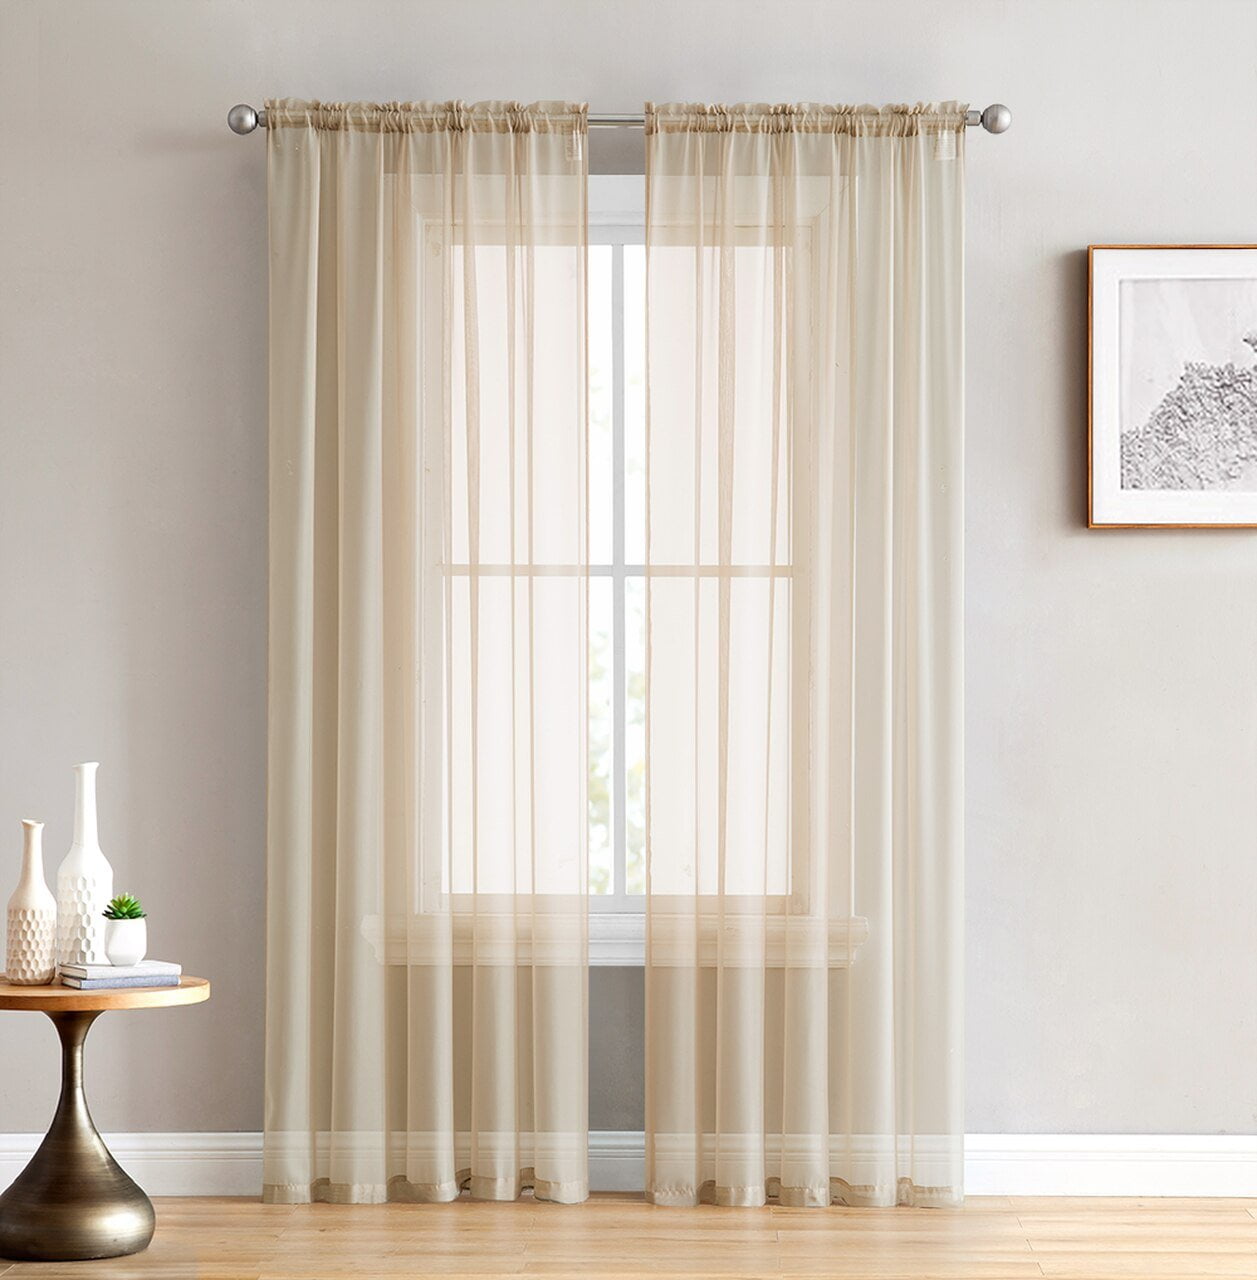 2 PRINTED VOILE SHEER WINDOW GROMMET PANELS CURTAIN TREATMENT 2 TONE #S38 108 " 